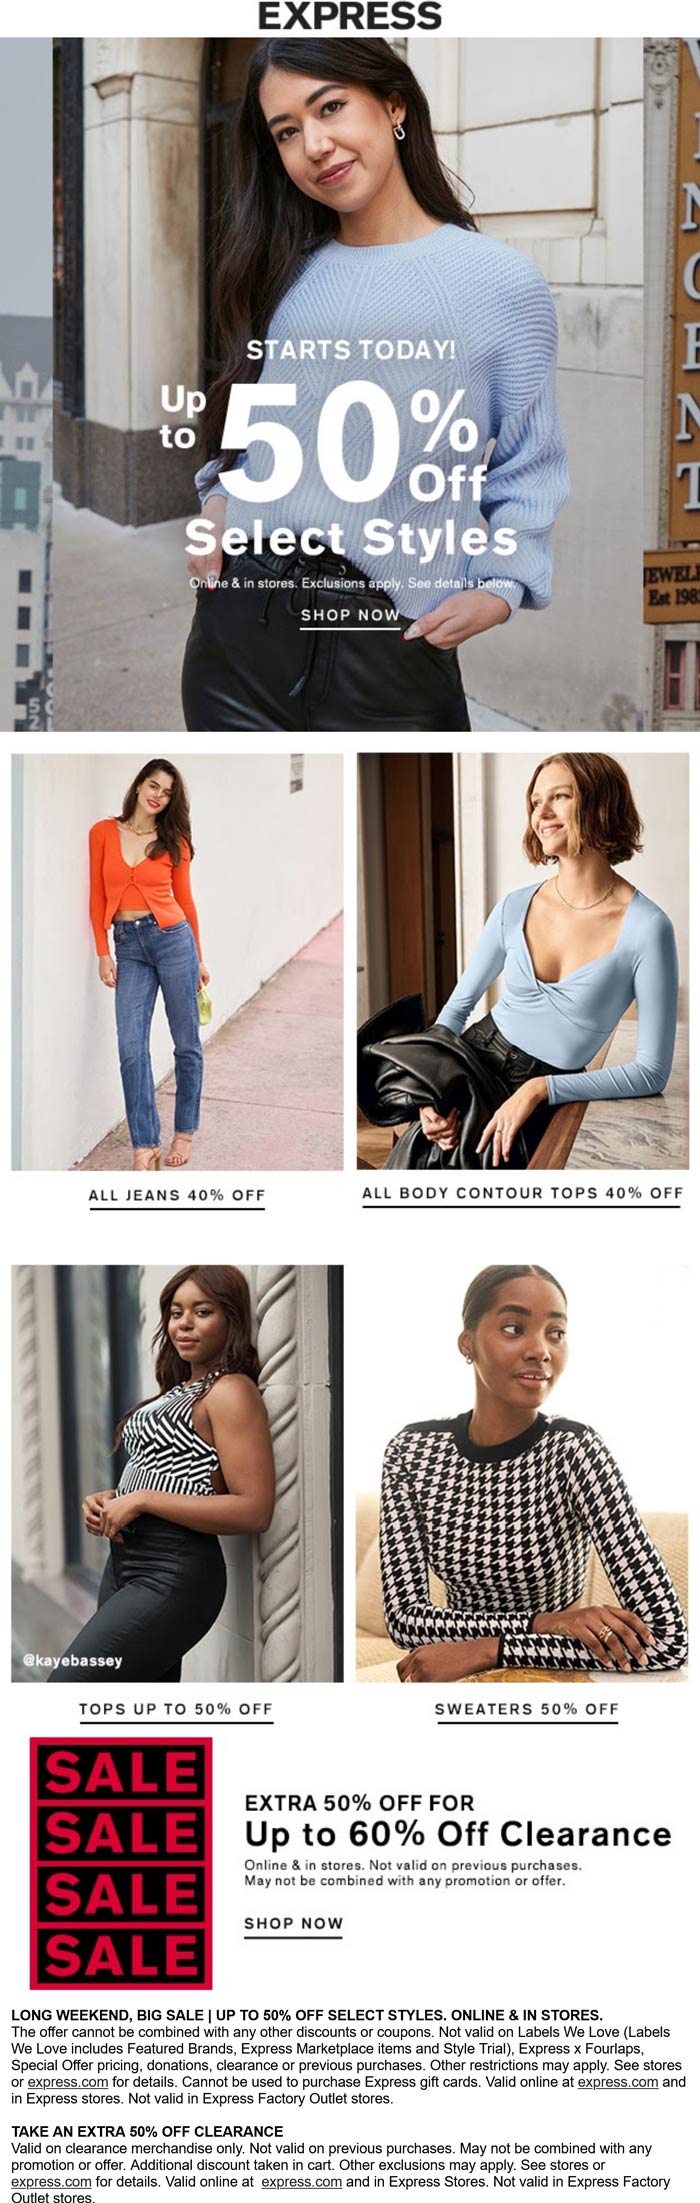 Express stores Coupon  40% off all jeans, extra 50% off clearance & more at Express, ditto online #express 